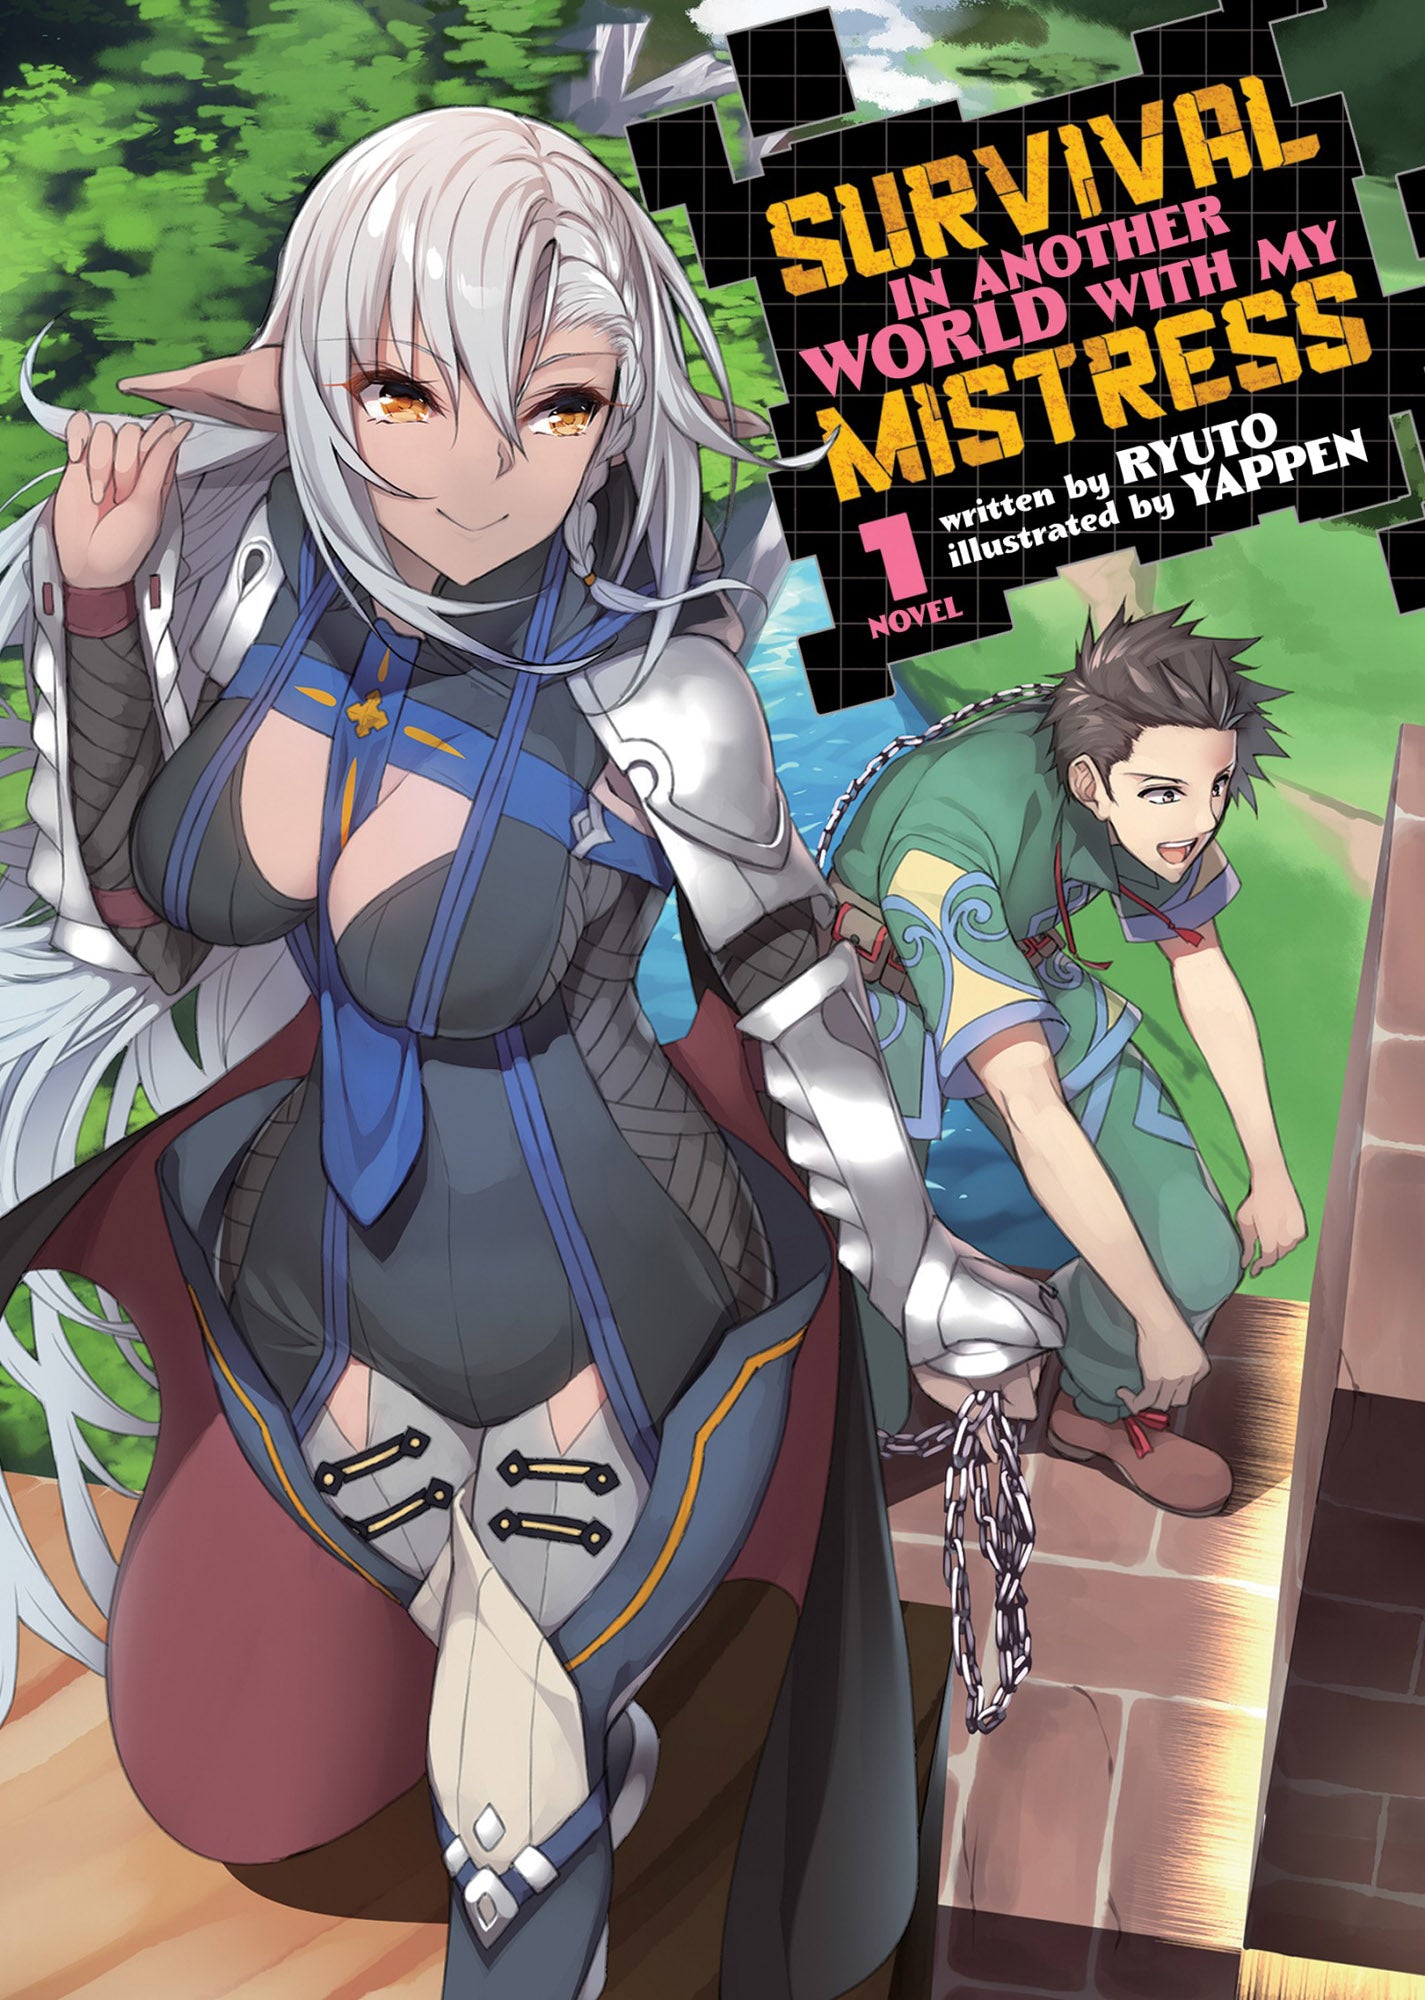 Survival in Another World with My Mistress! (Light Novel) Vol. 01